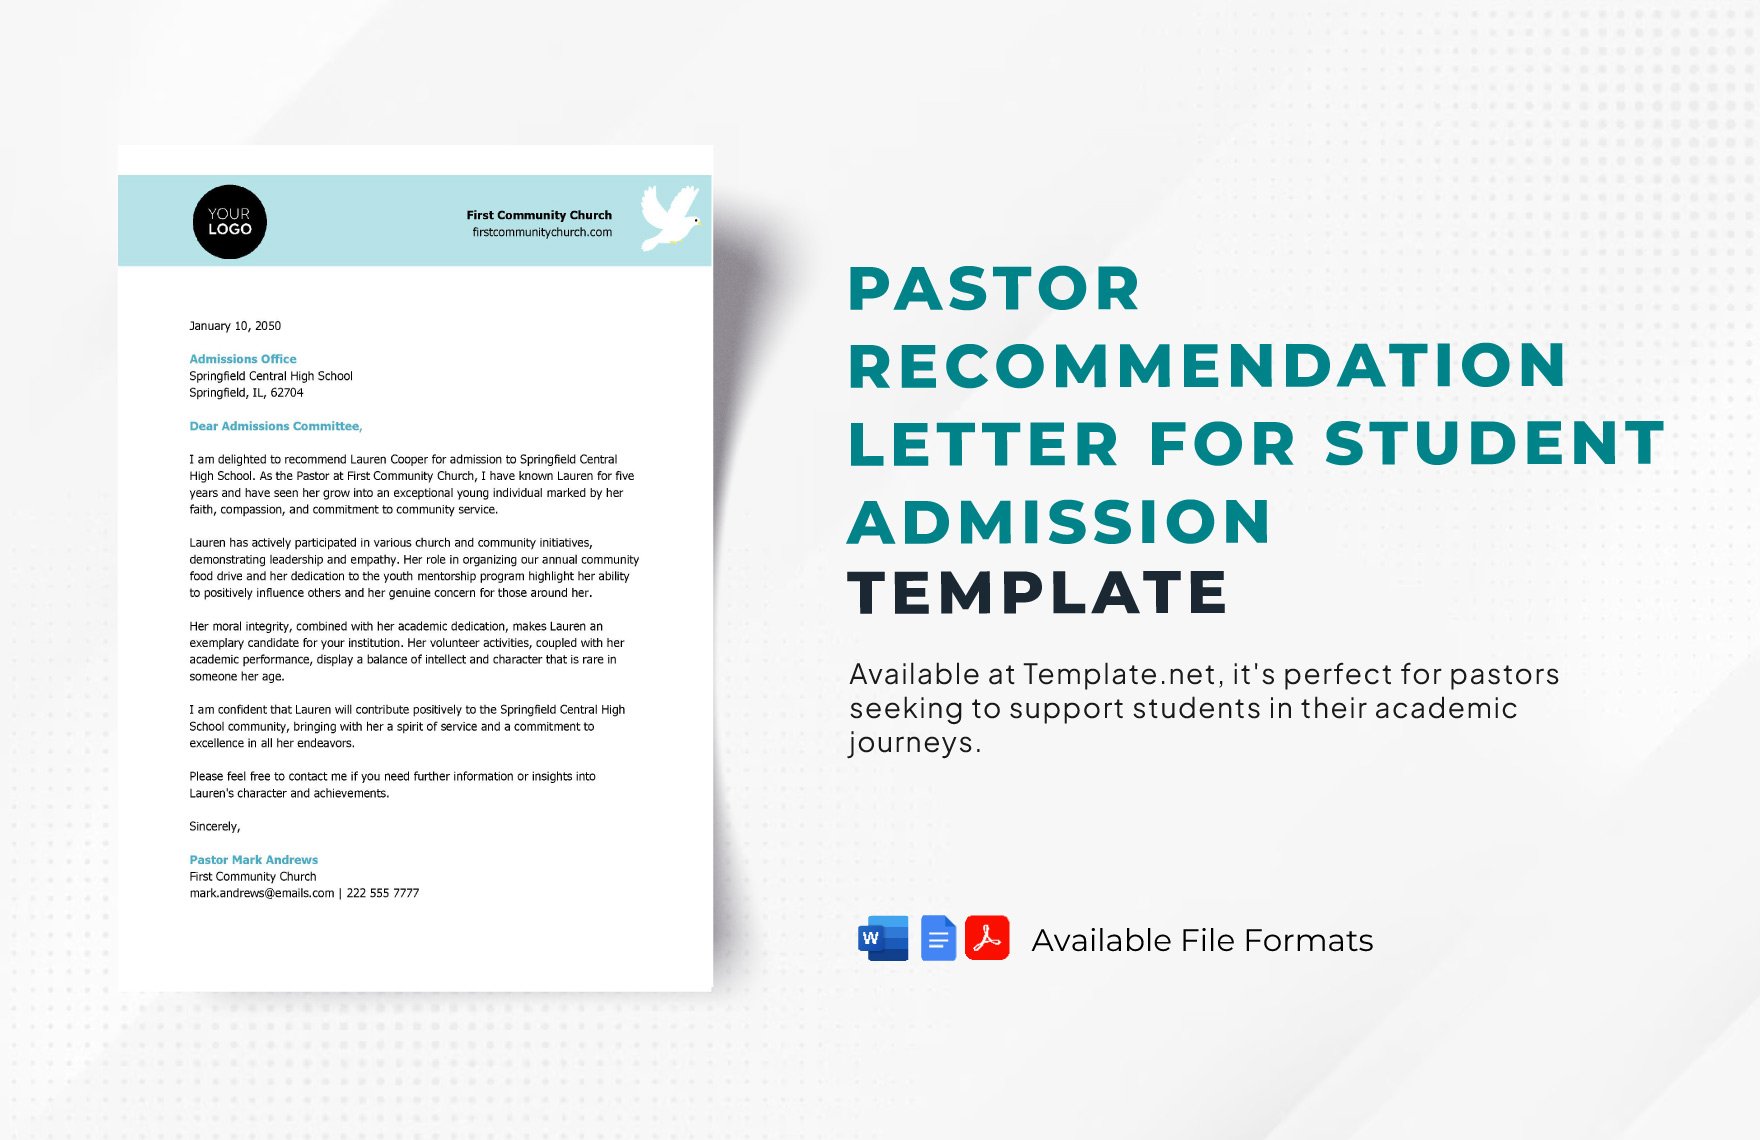 Pastor Recommendation Letter for Student Admission Template